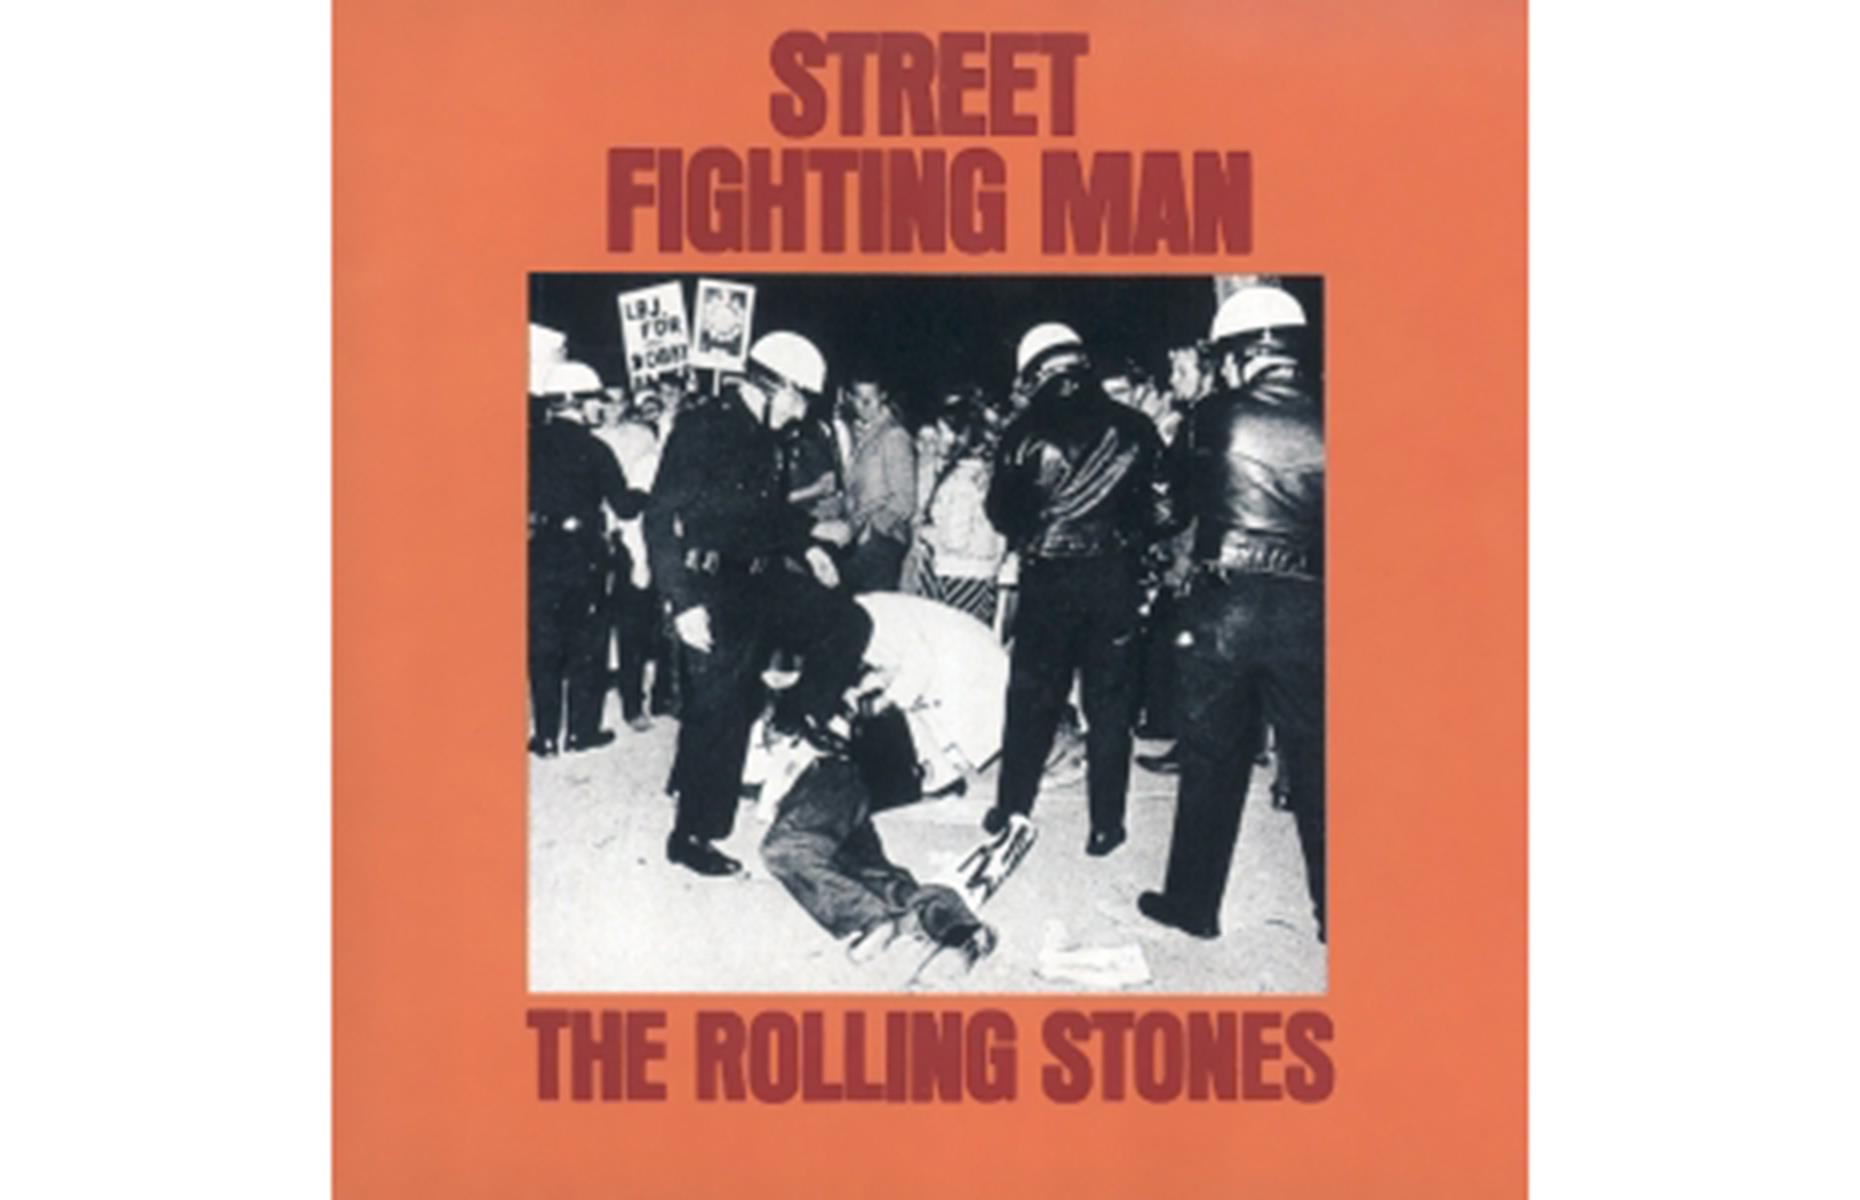 The Rolling Stones – Street Fighting Man: up to $17,800 (£14,511)